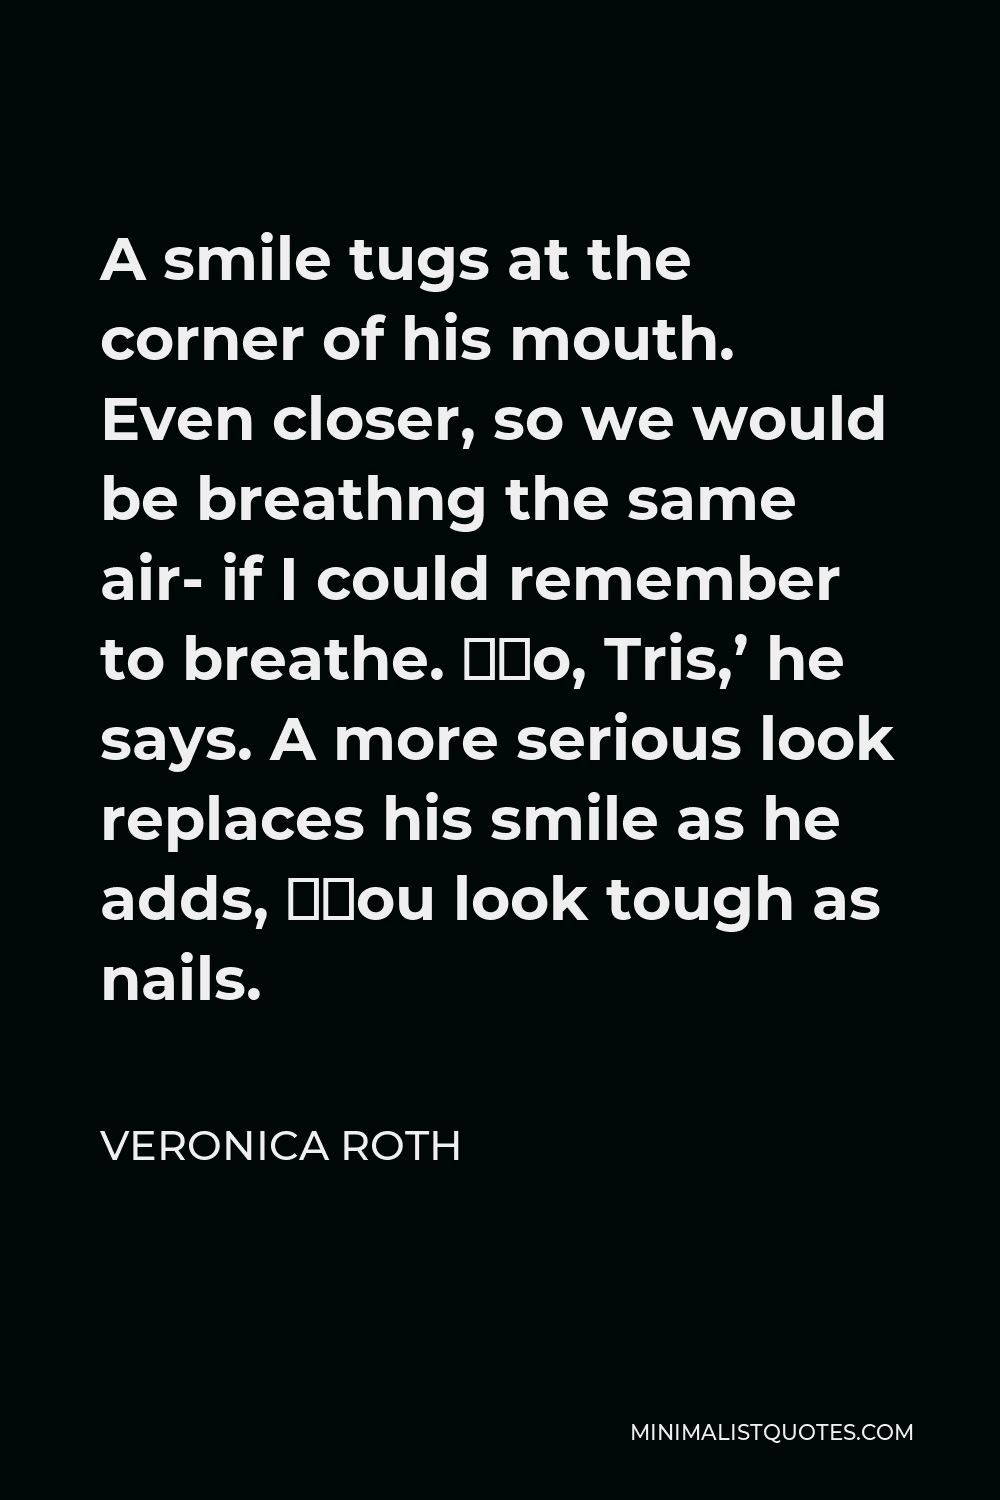 Veronica Roth Quote - A smile tugs at the corner of his mouth. Even closer, so we would be breathng the same air- if I could remember to breathe. ‘No, Tris,’ he says. A more serious look replaces his smile as he adds, ‘You look tough as nails.